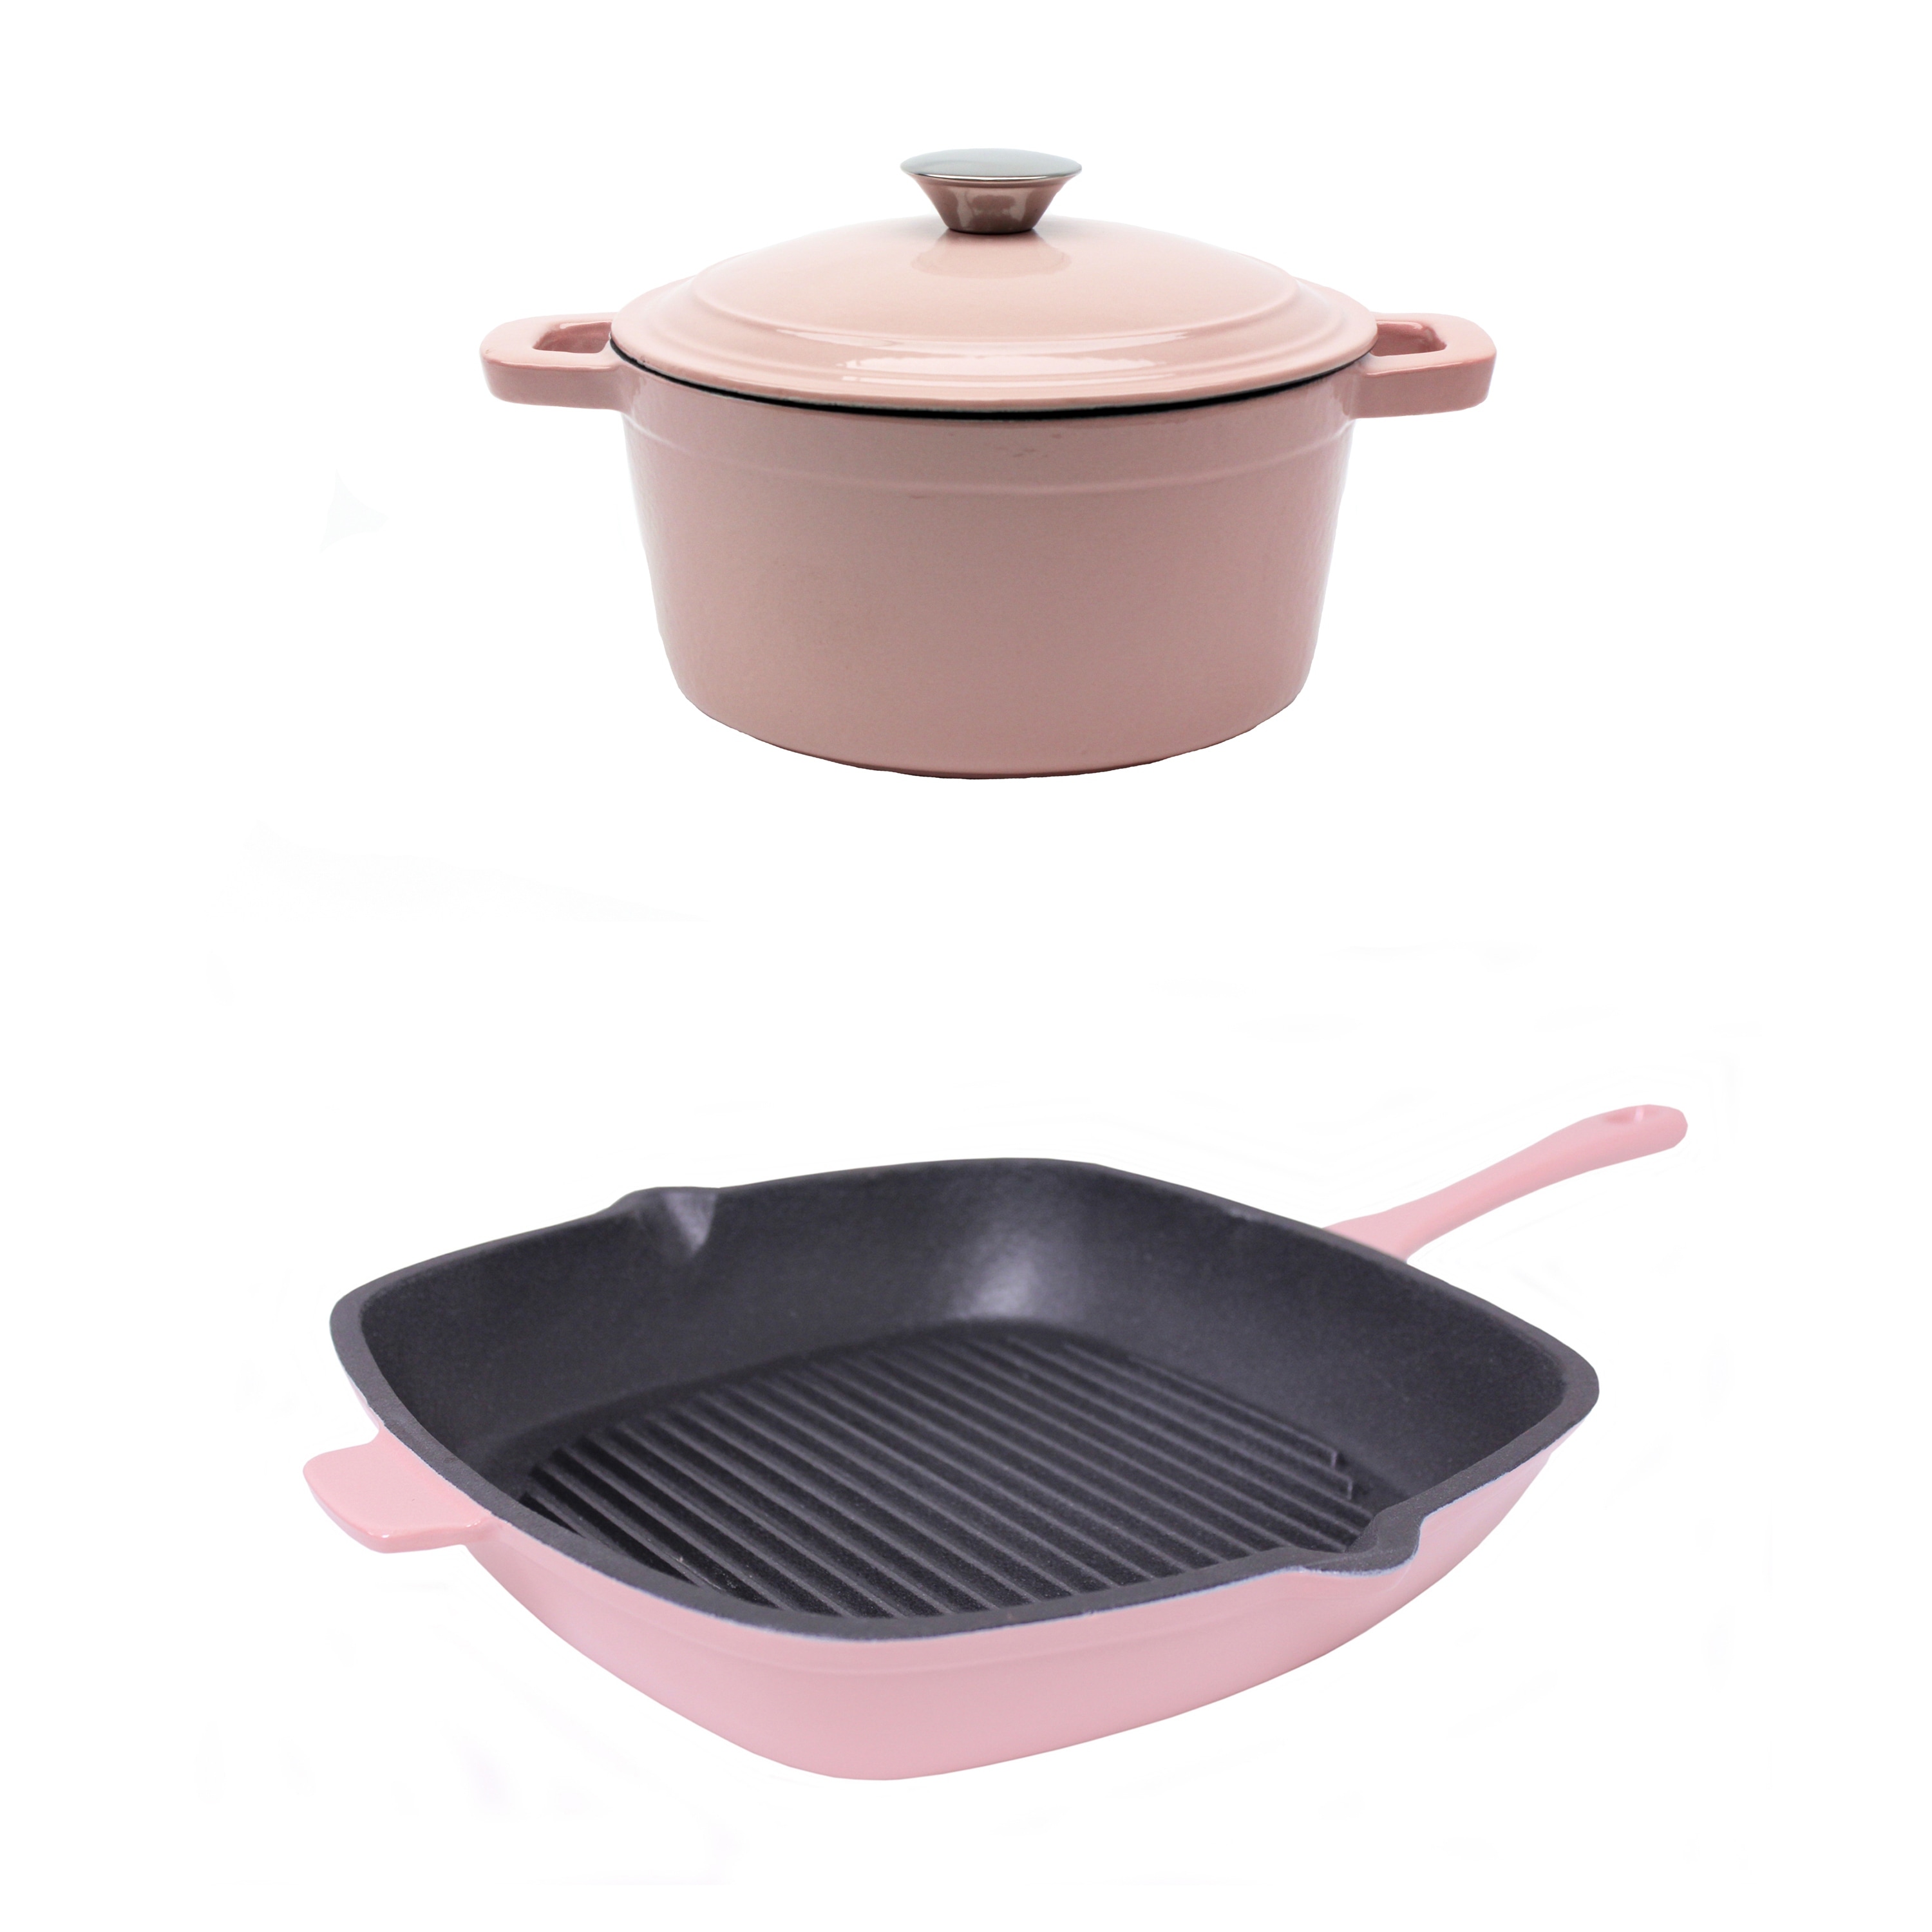 https://ak1.ostkcdn.com/images/products/is/images/direct/a3980dc3bd7f0239d6e61b65e3479e83fac22b73/Neo-3pc-Cast-Iron-Set-3qt-Covered-Dutch-Oven-%26-11%22-Grill-Pan-Pink.jpg